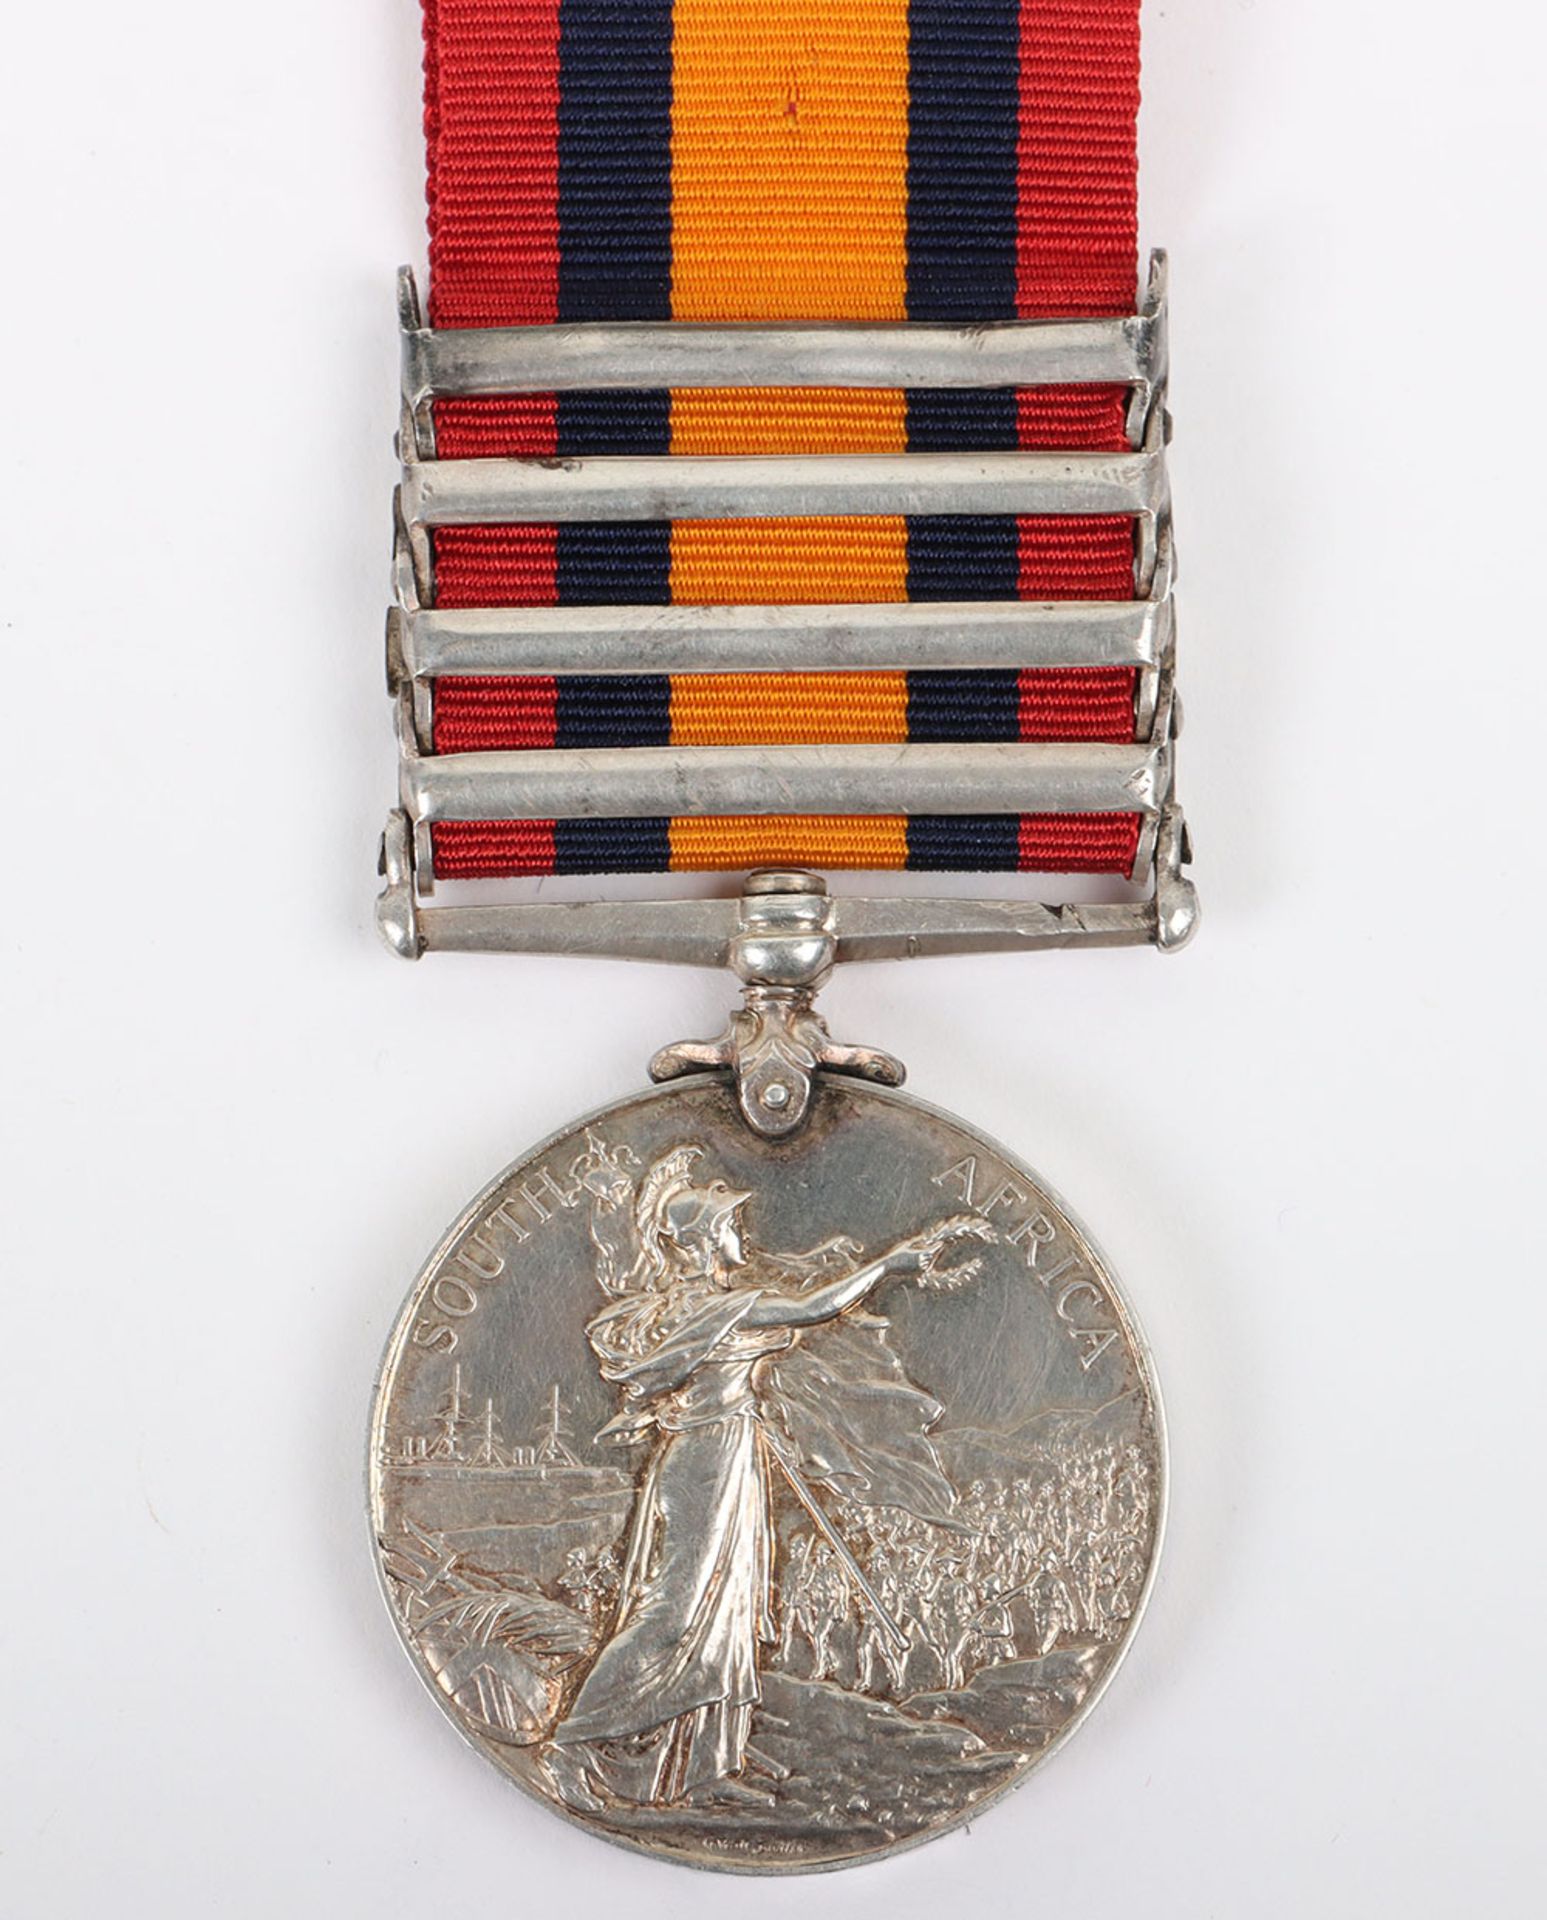 Queens South Africa Medal Imperial Light Infantry - Image 7 of 7